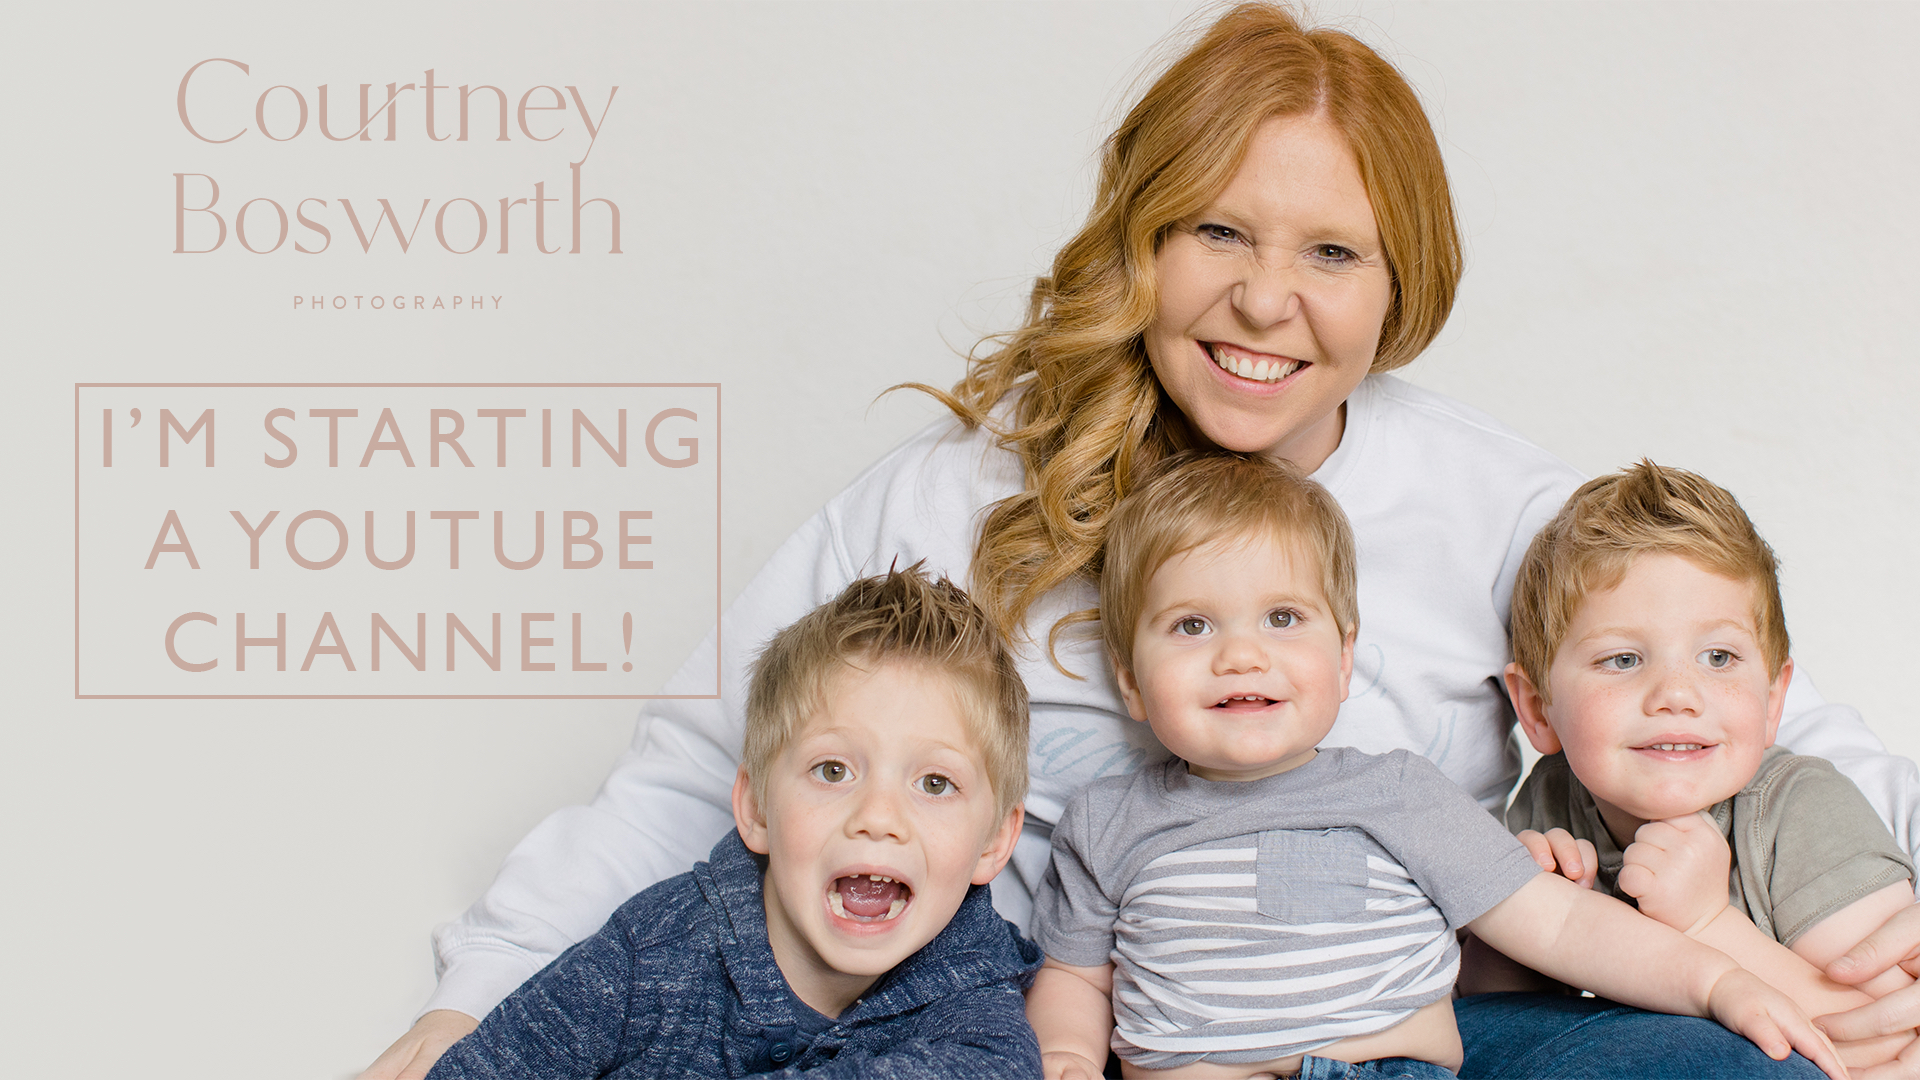 My Photography Journey: Courtney Bosworth shares her journey from teacher to mom and photographer in her first YouTube video